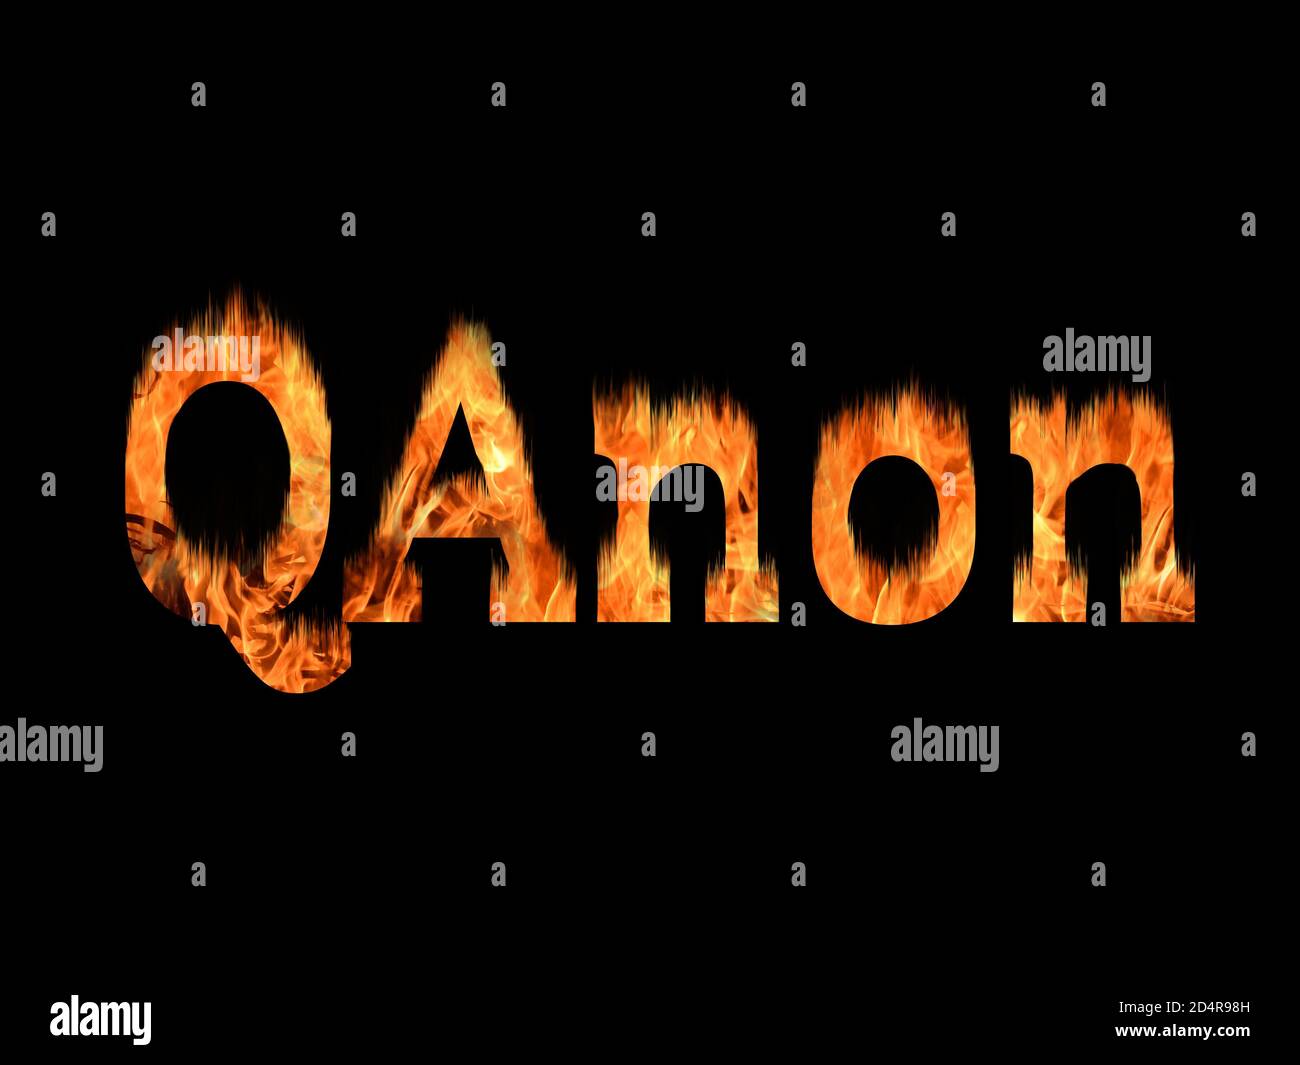 QAnon or Q Anon deep state conspiracy theory text on fire over black background Stock Photo